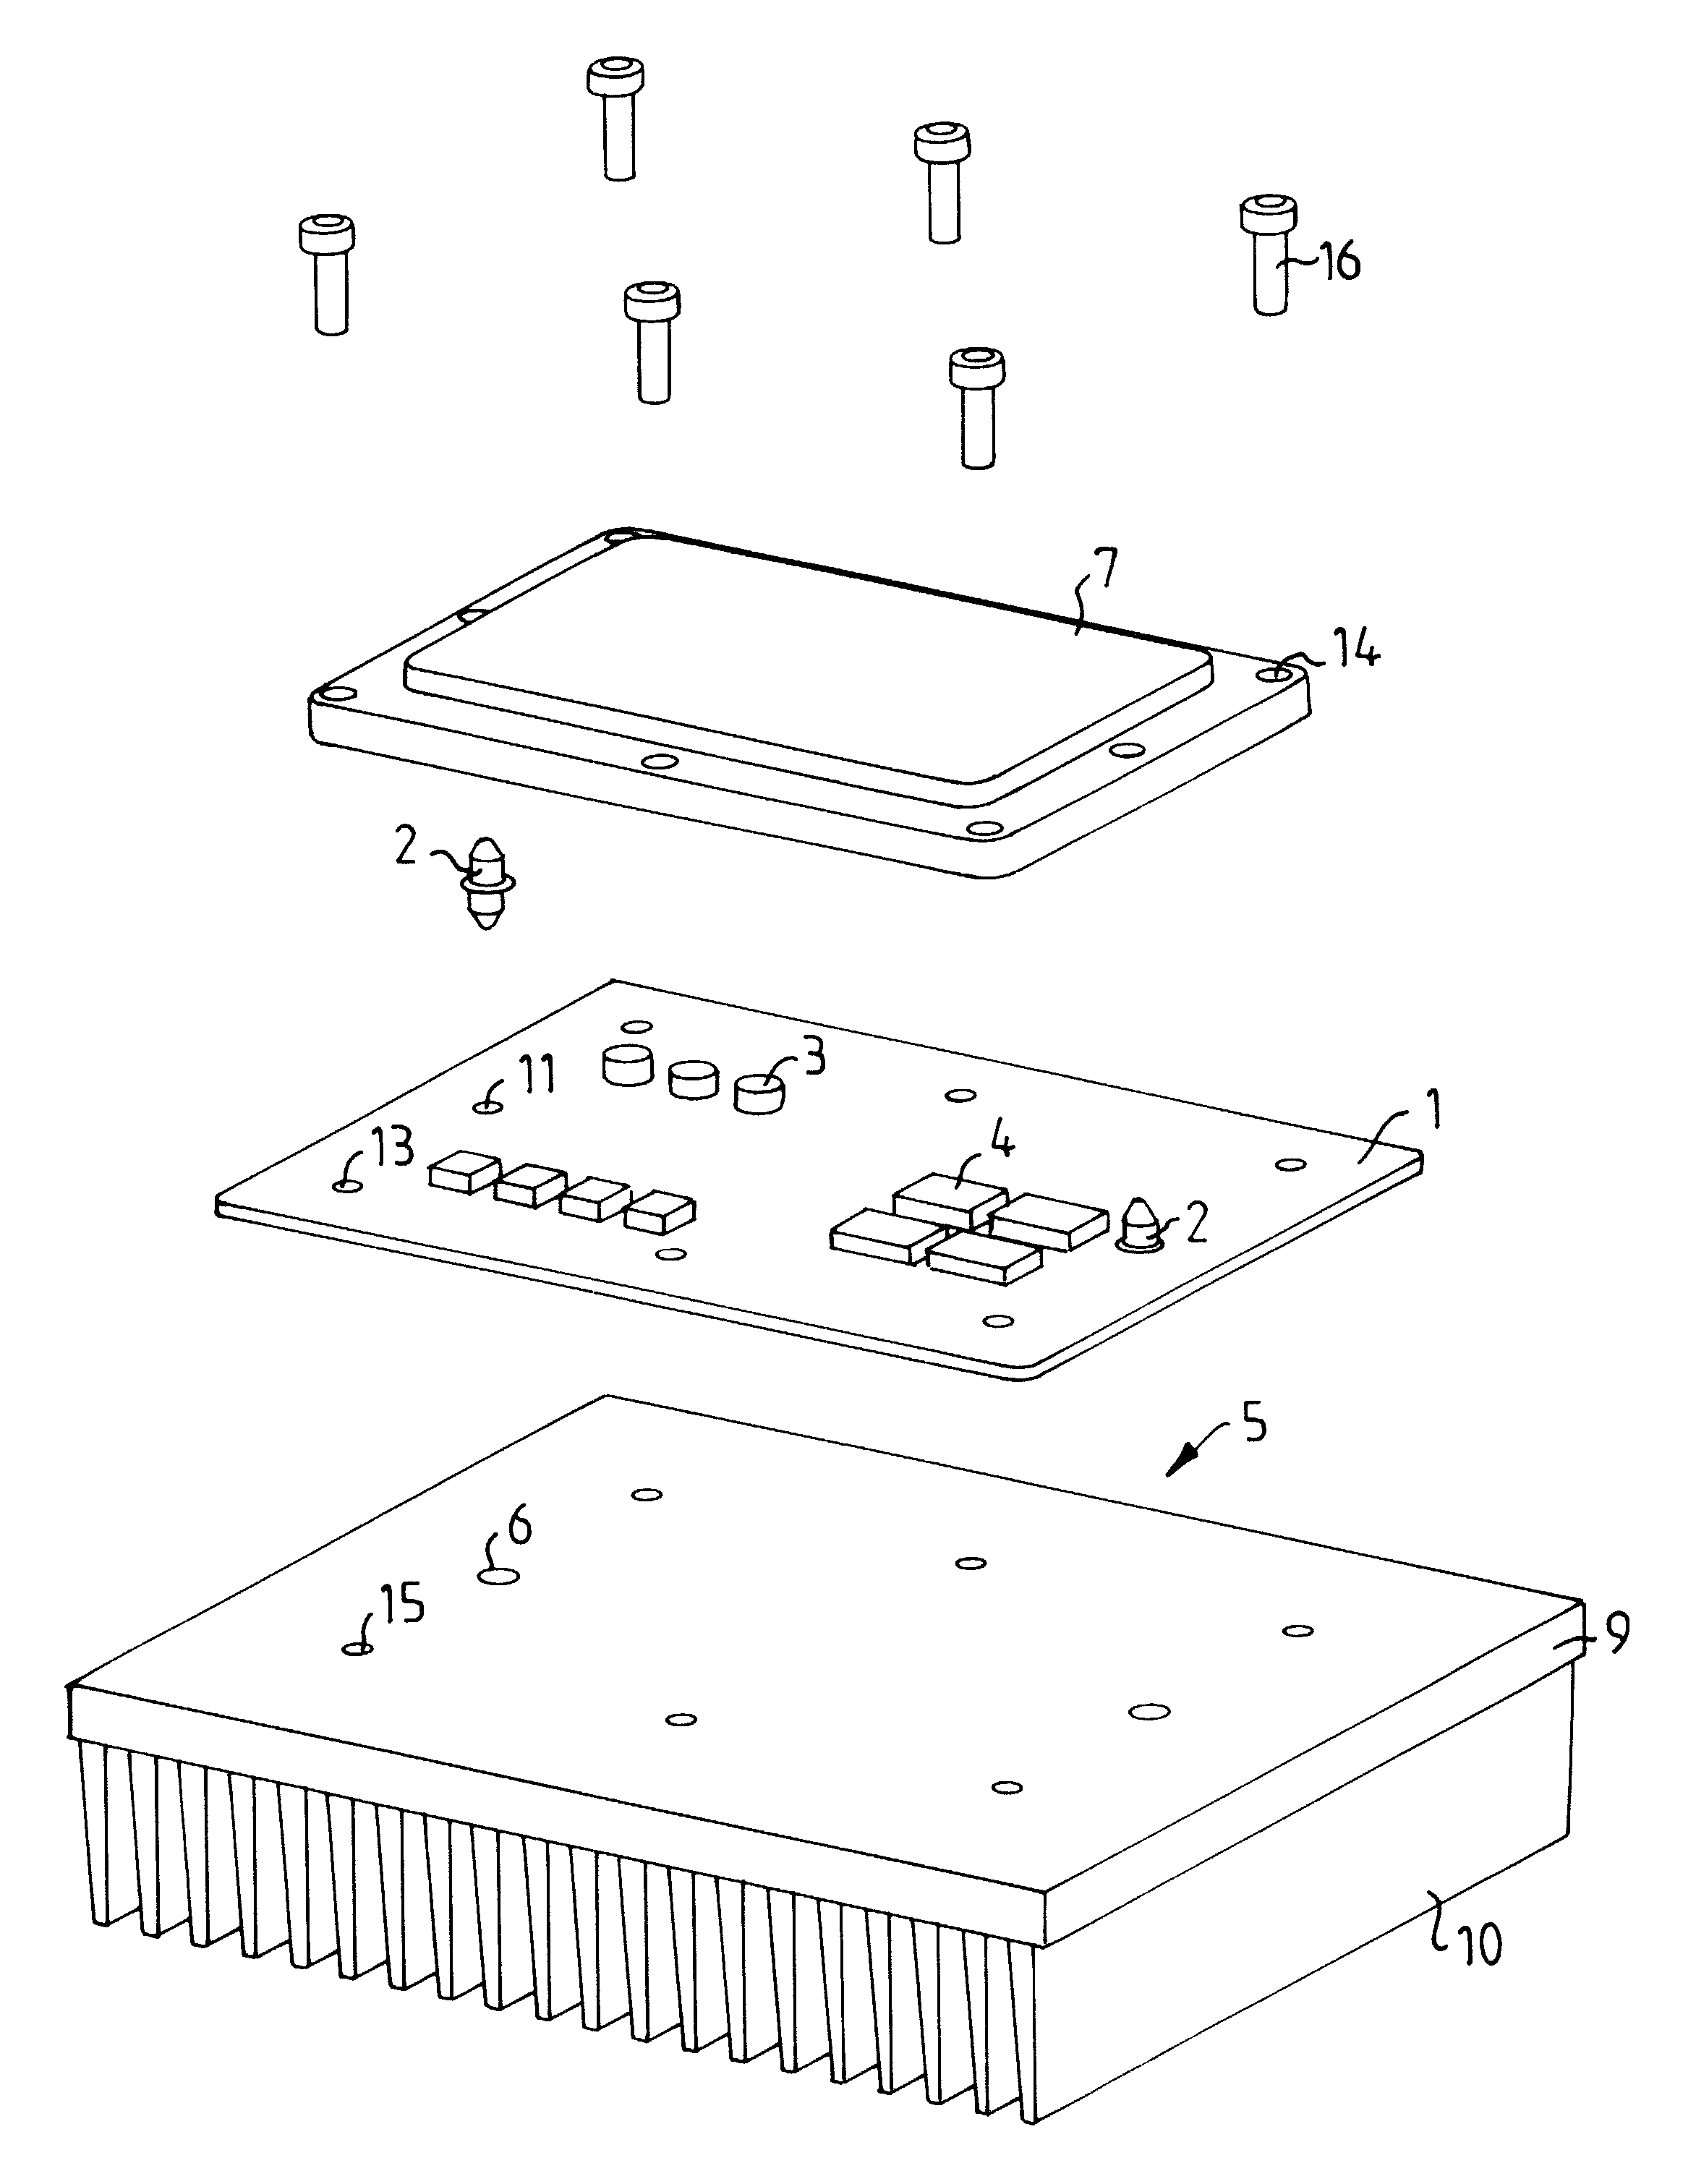 Method and apparatus for improving mounting